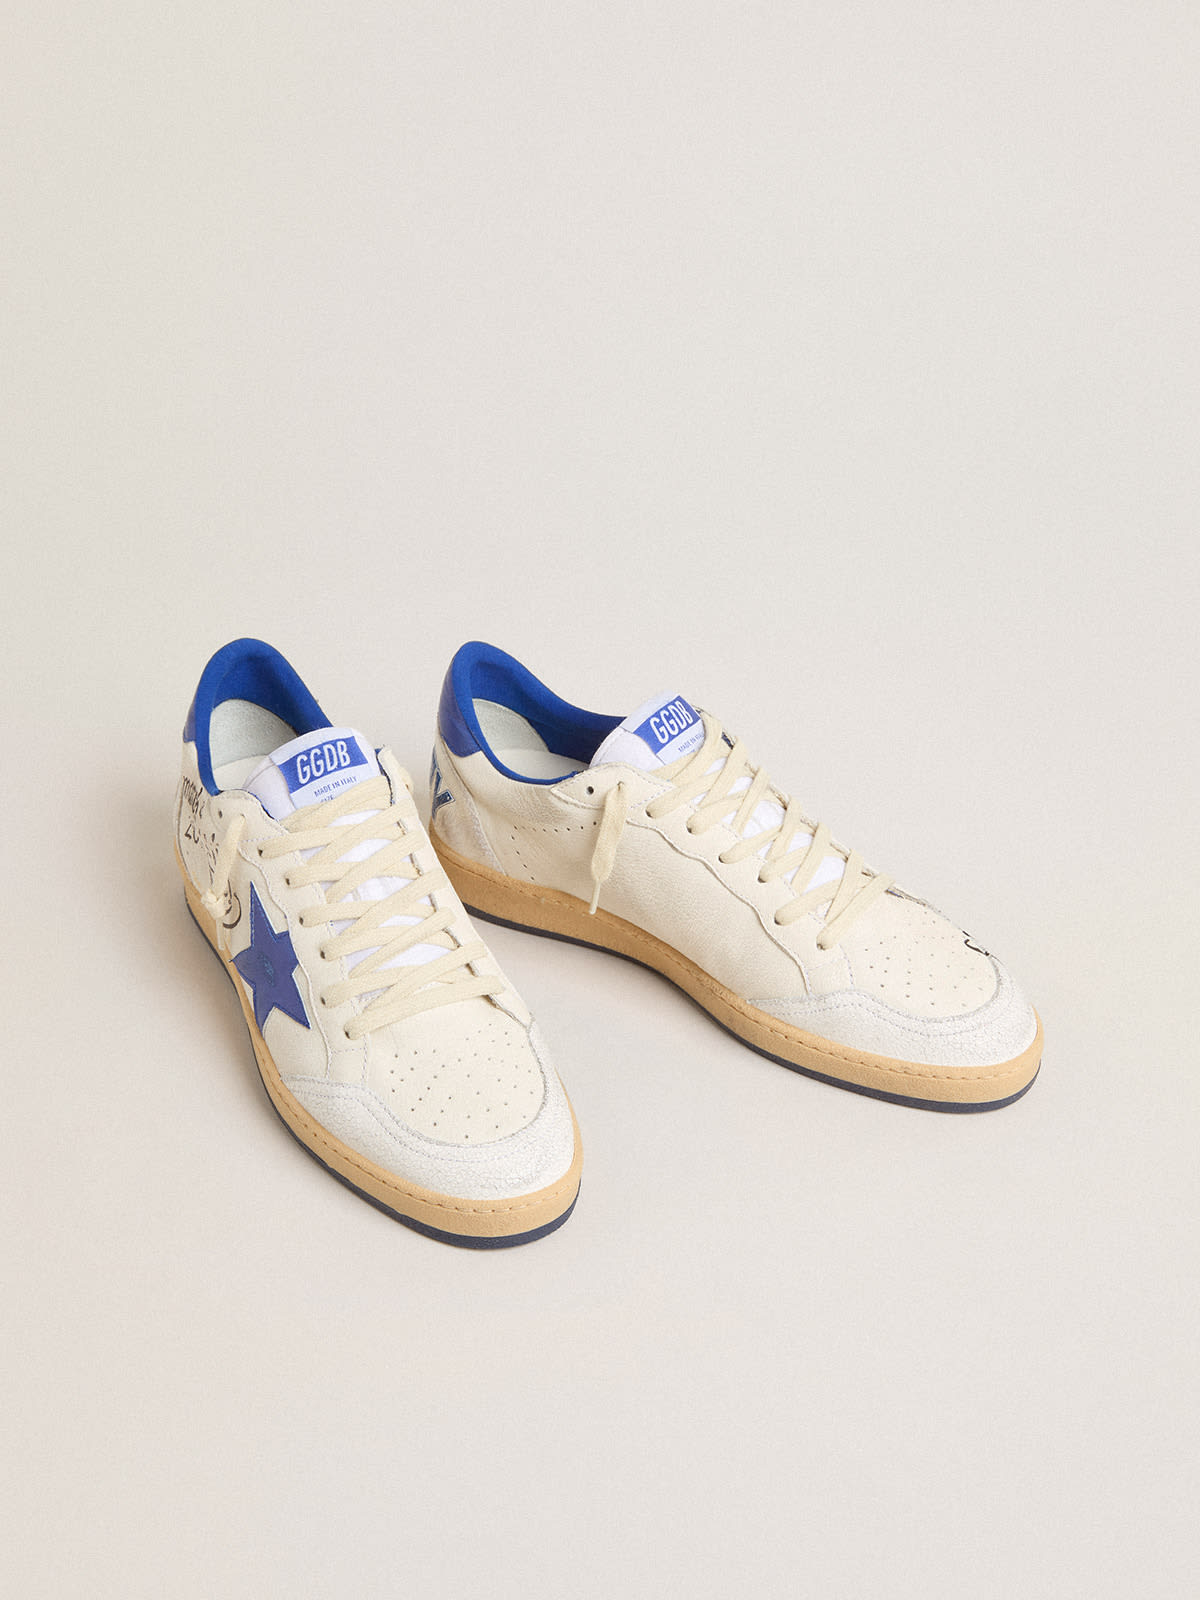 Golden Goose - Women’s Ball Star Wishes in white nappa leather with bright blue star and heel tab in 